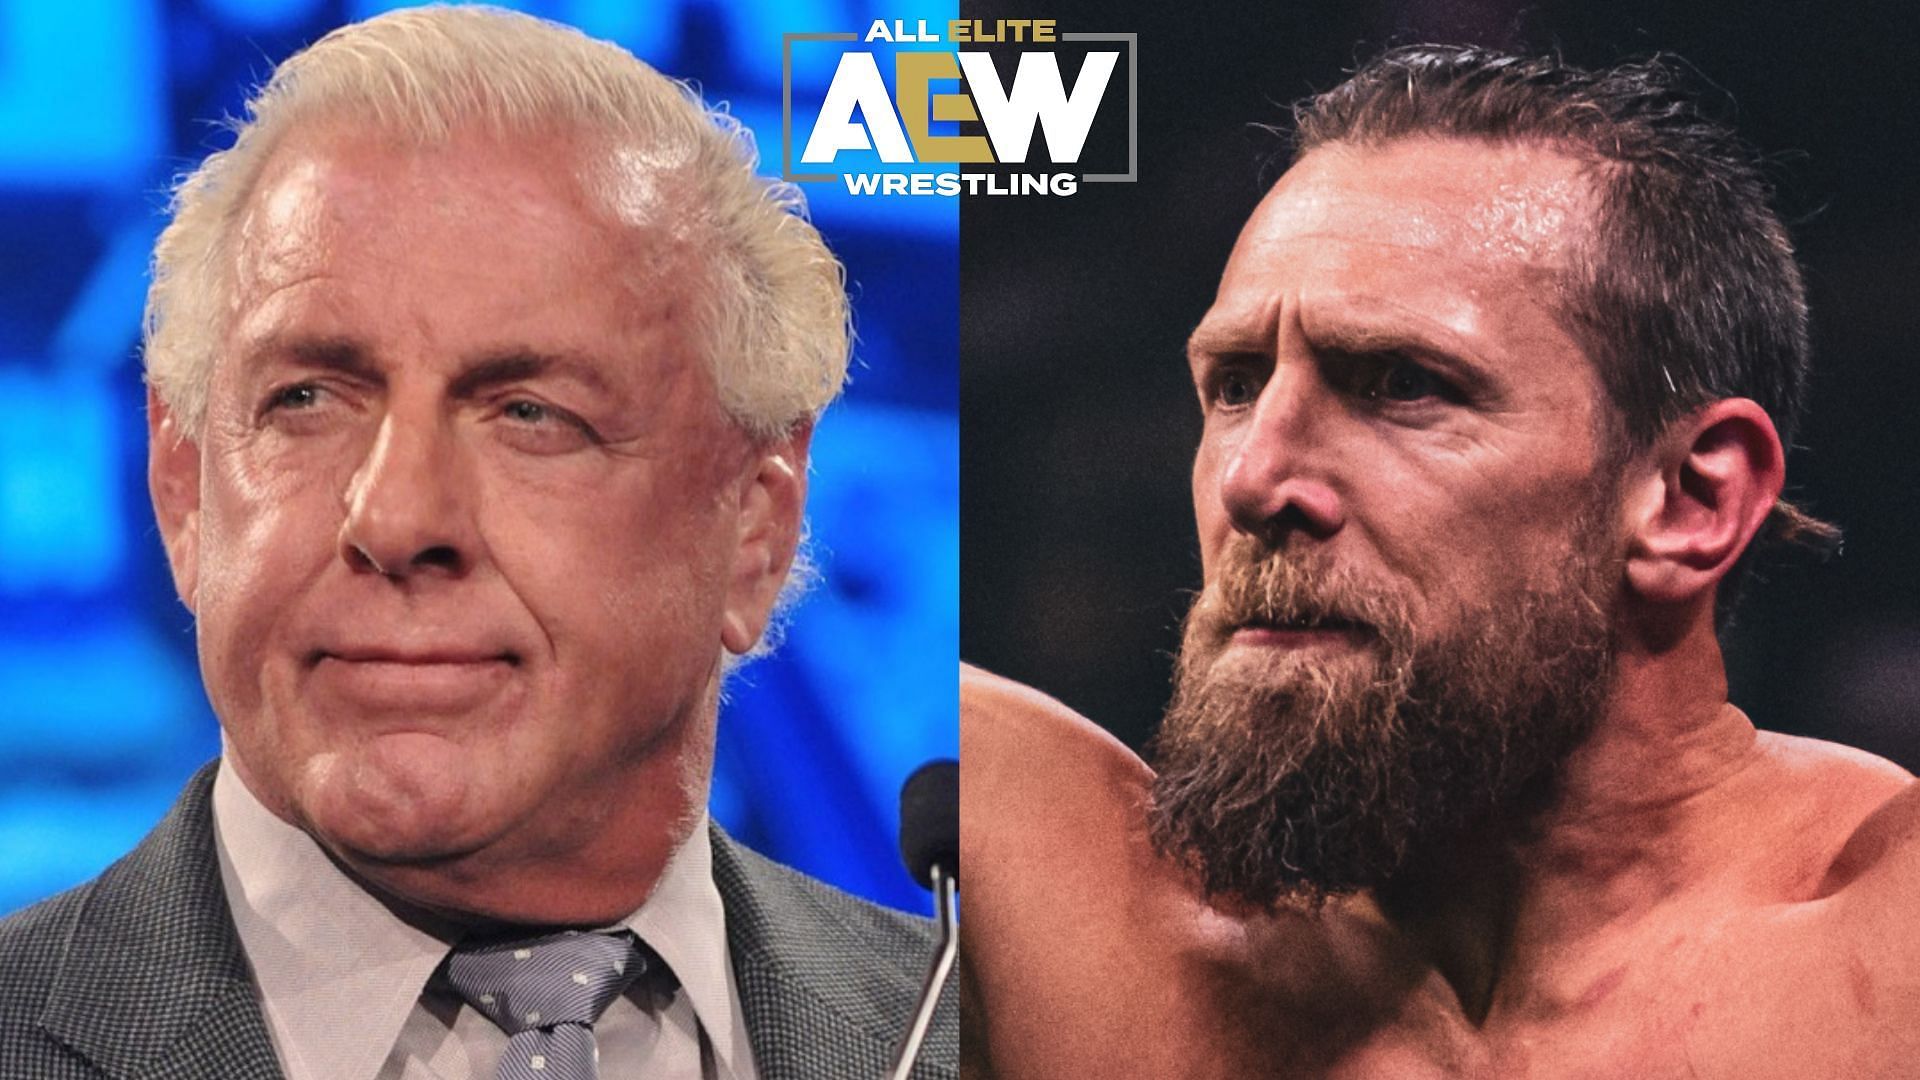 Ric Flair was embarrassed at one of Bryan Danielson